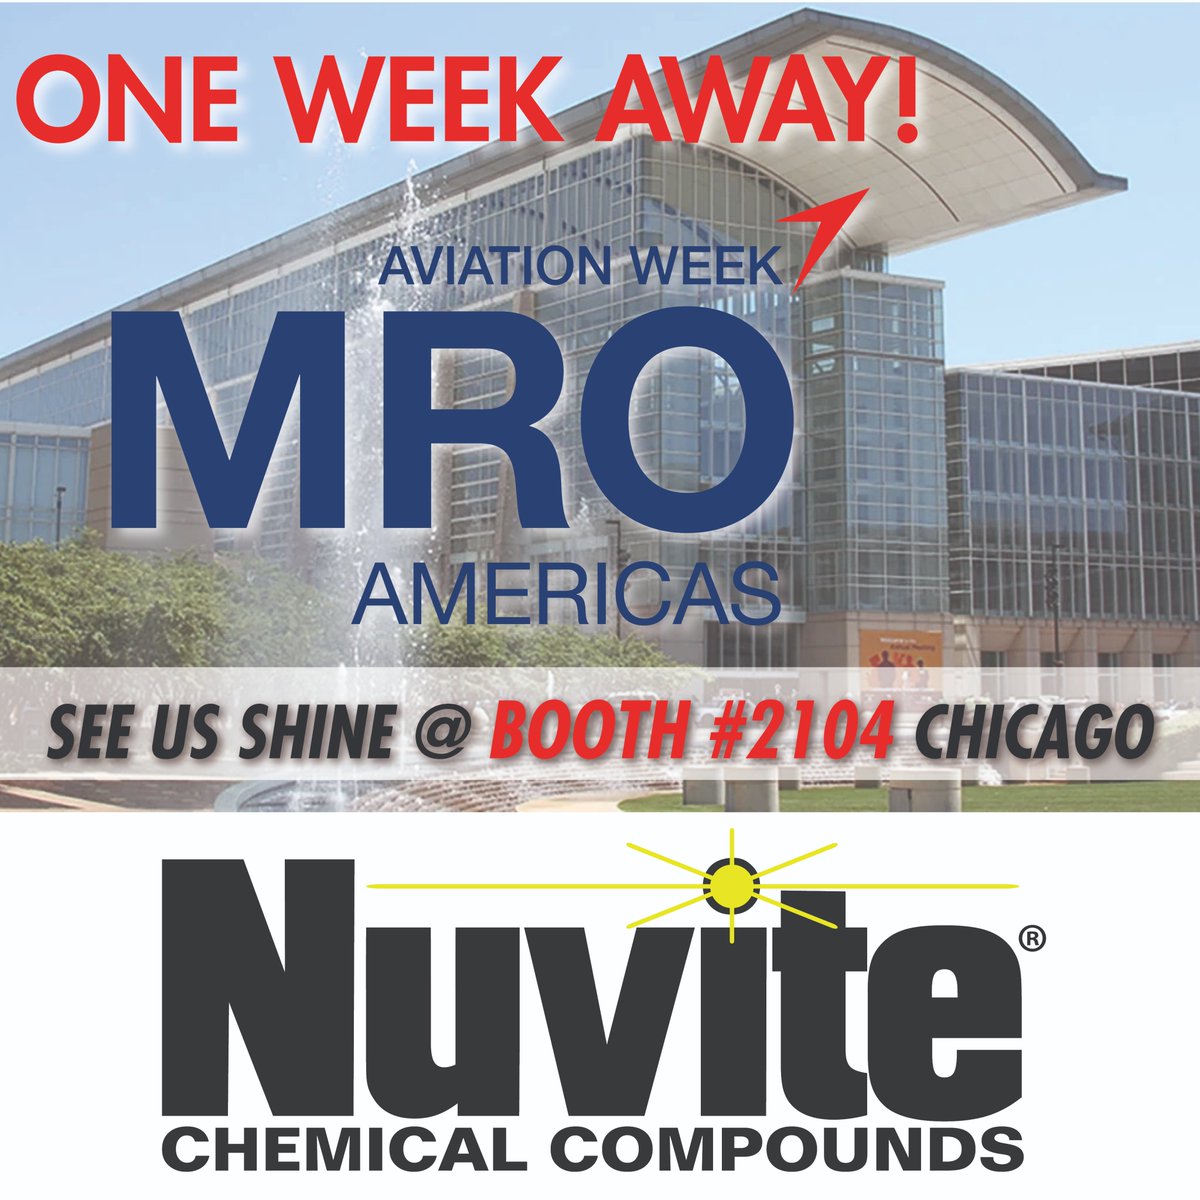 ONE WEEK AWAY from MRO Americas in Chicago, IL. Visit our experts in booth #2104 to learn about our new products!! ✨✈️
 
 #Nuvite #NuviteChemical #MetalPolish #MRO #MROAmericas #MROAmericas2024 #AviationWeek #Chicago #NewProducts #ProductLaunch #SkydeClear #PowerPax #NuLucent